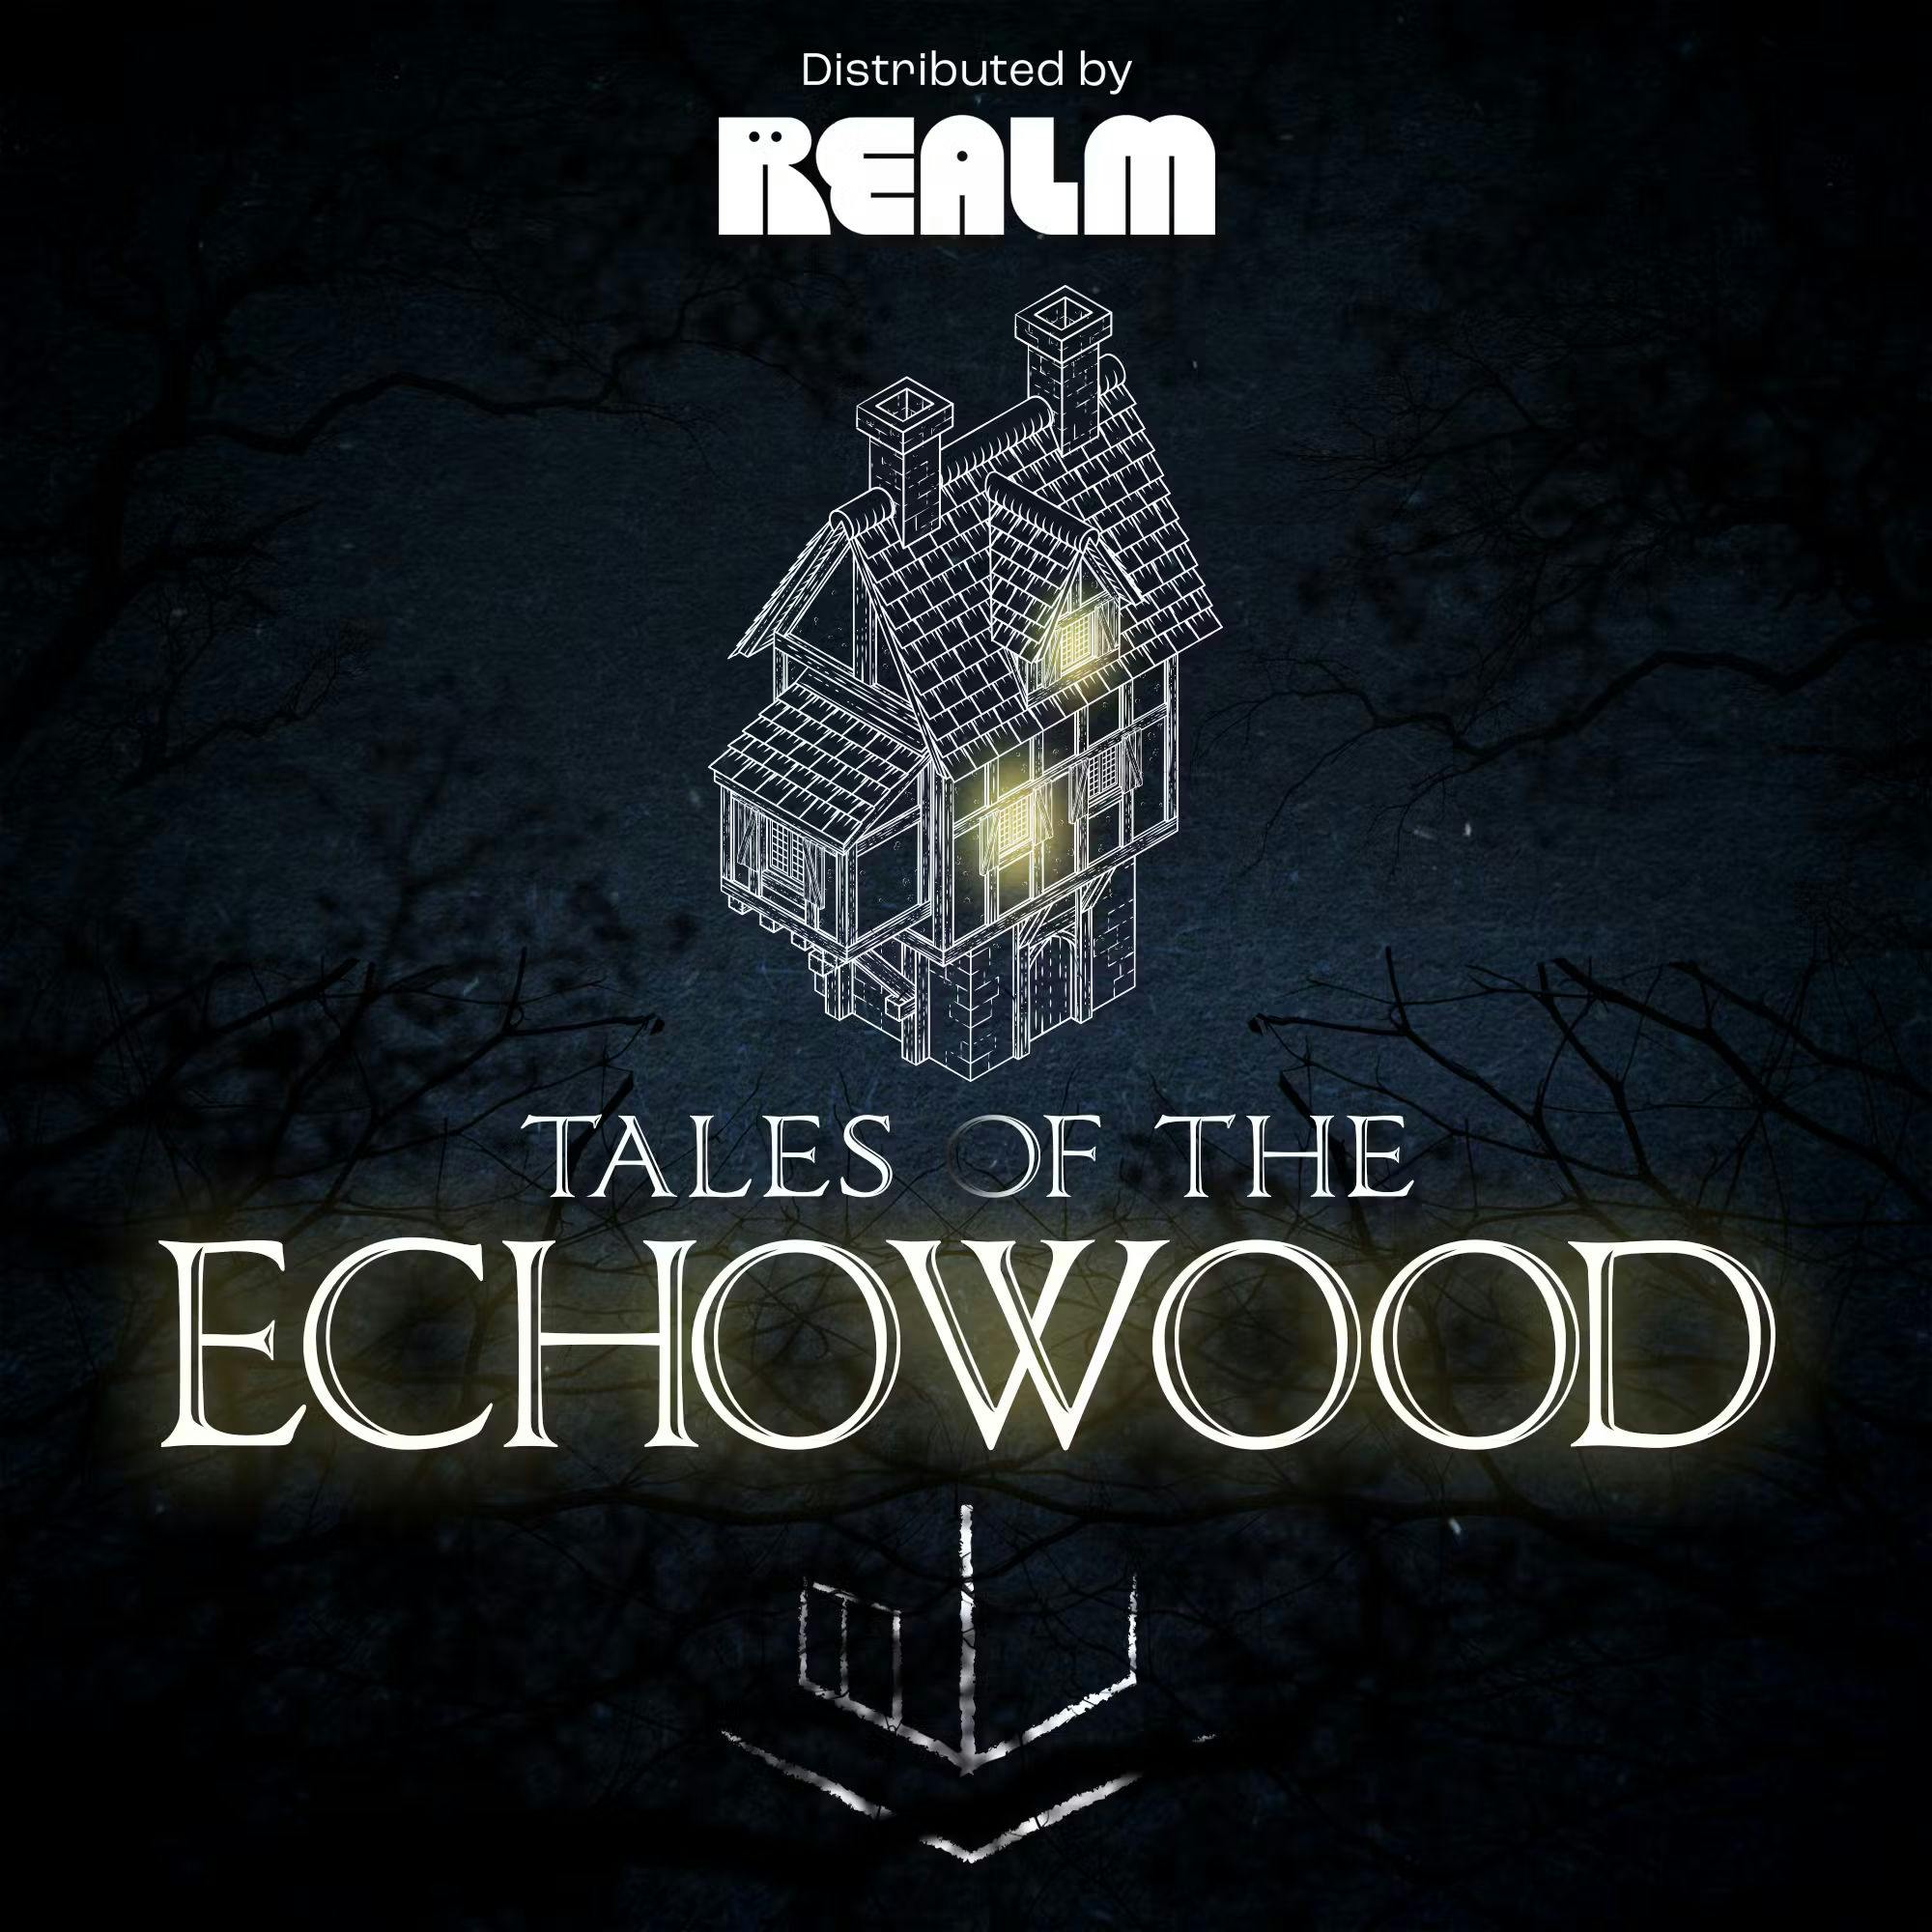 Tales Of The Echowood